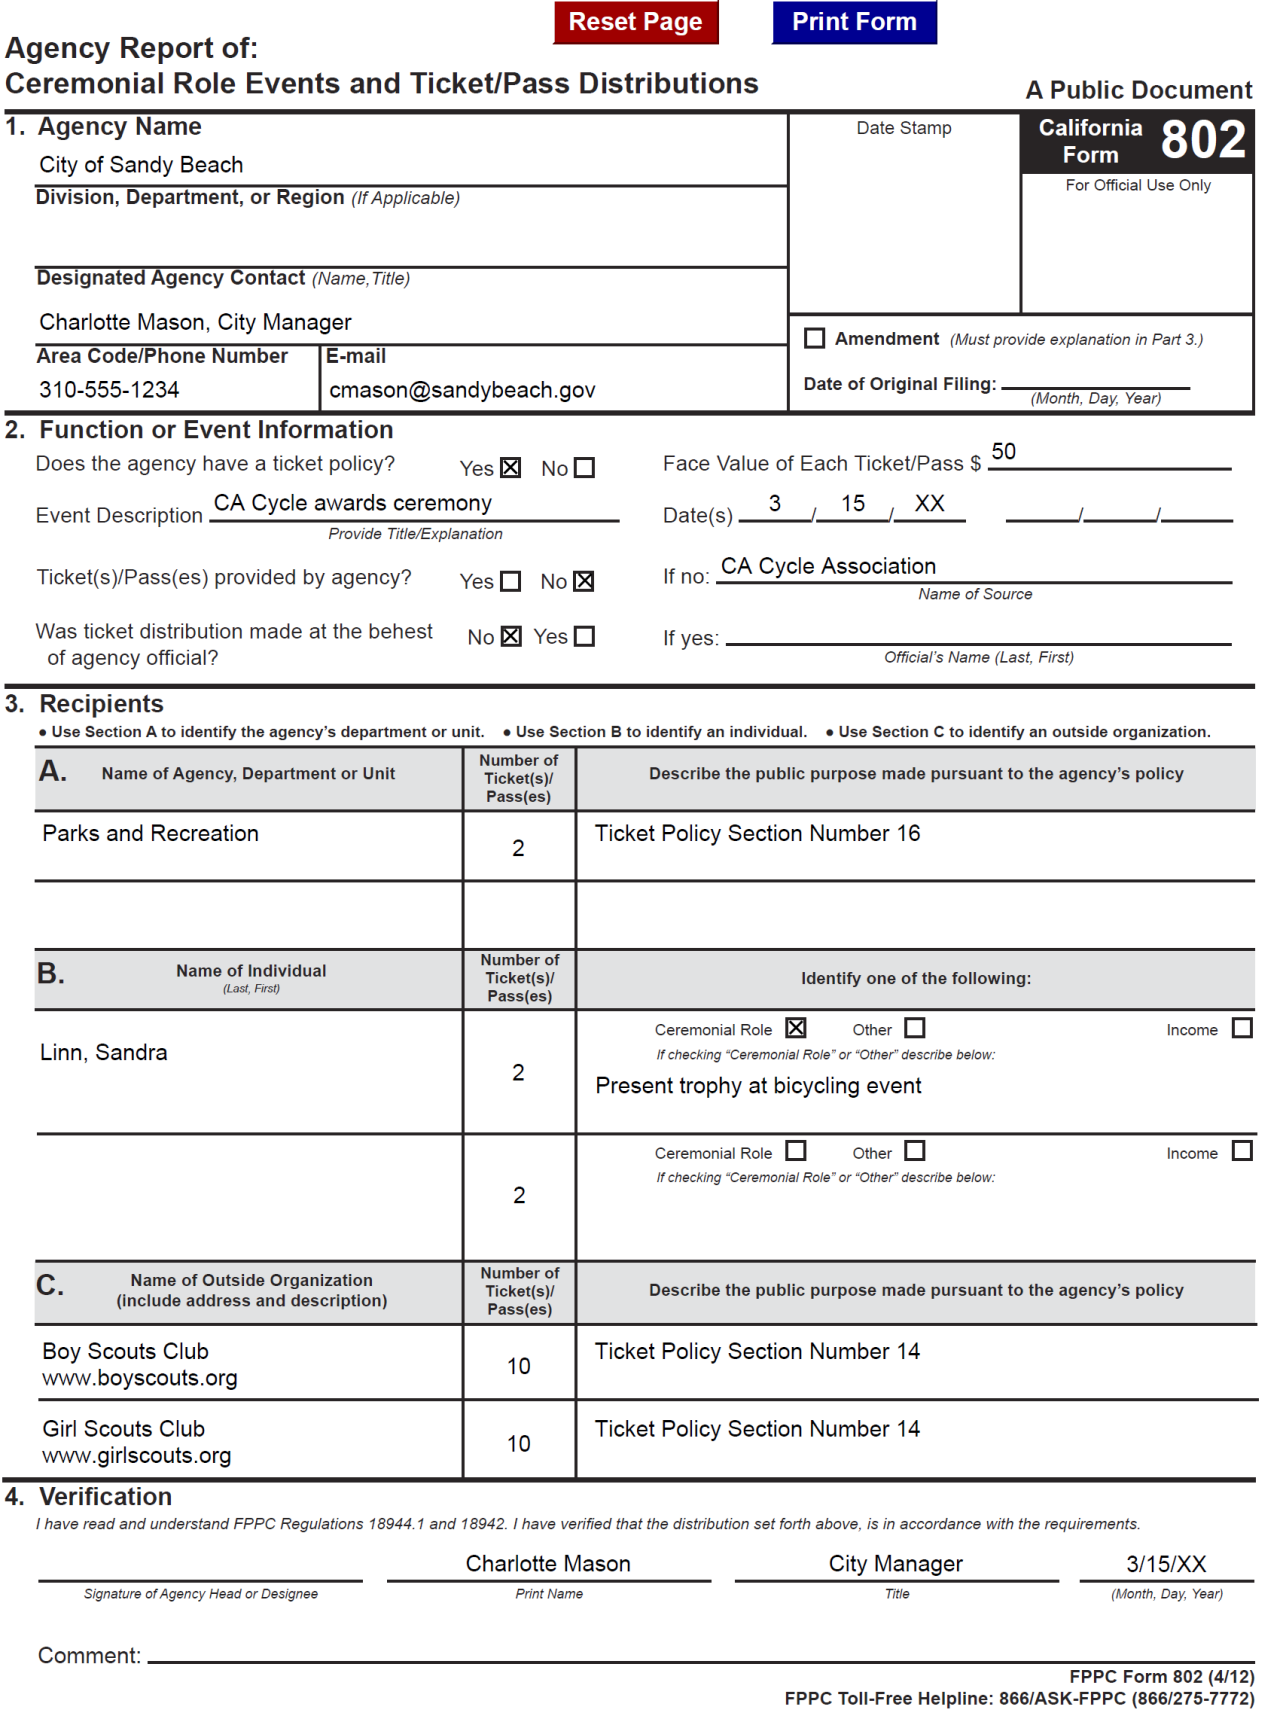 A sample version of Form 802 properly filled out.